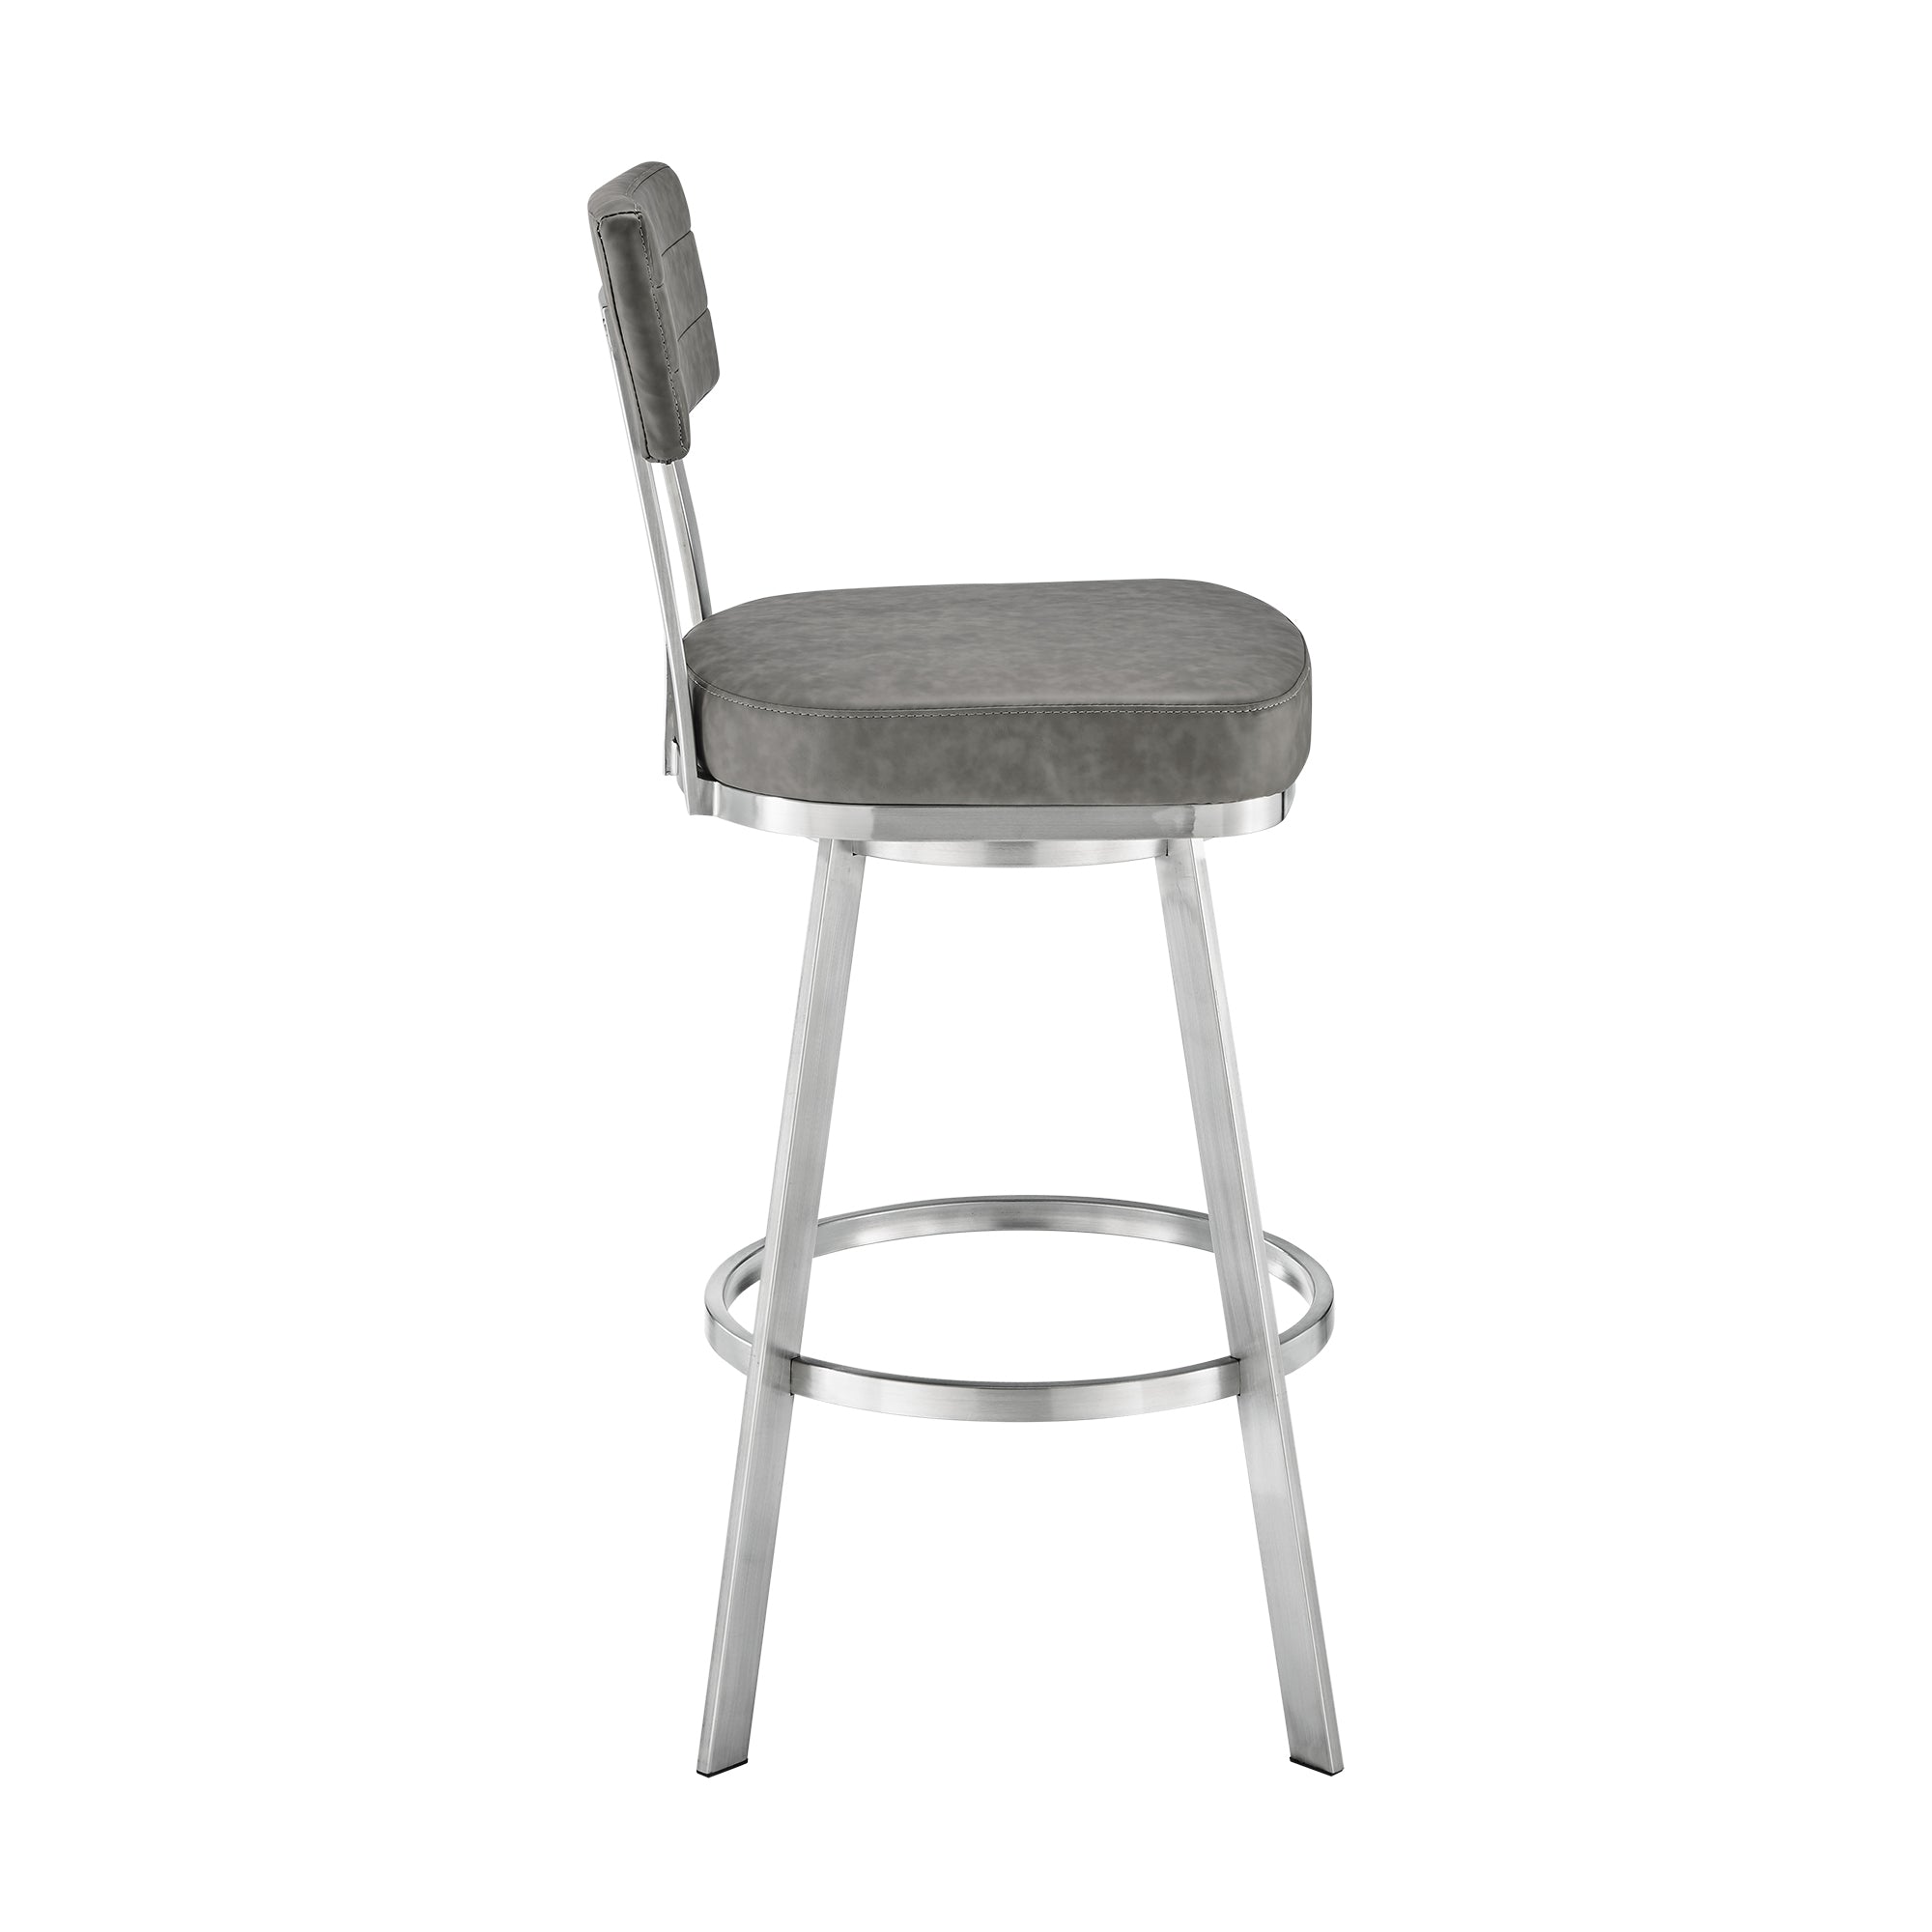 Armen Living - Jinab Swivel Counter or Bar Stool in Faux Leather and Metal - 840254335295